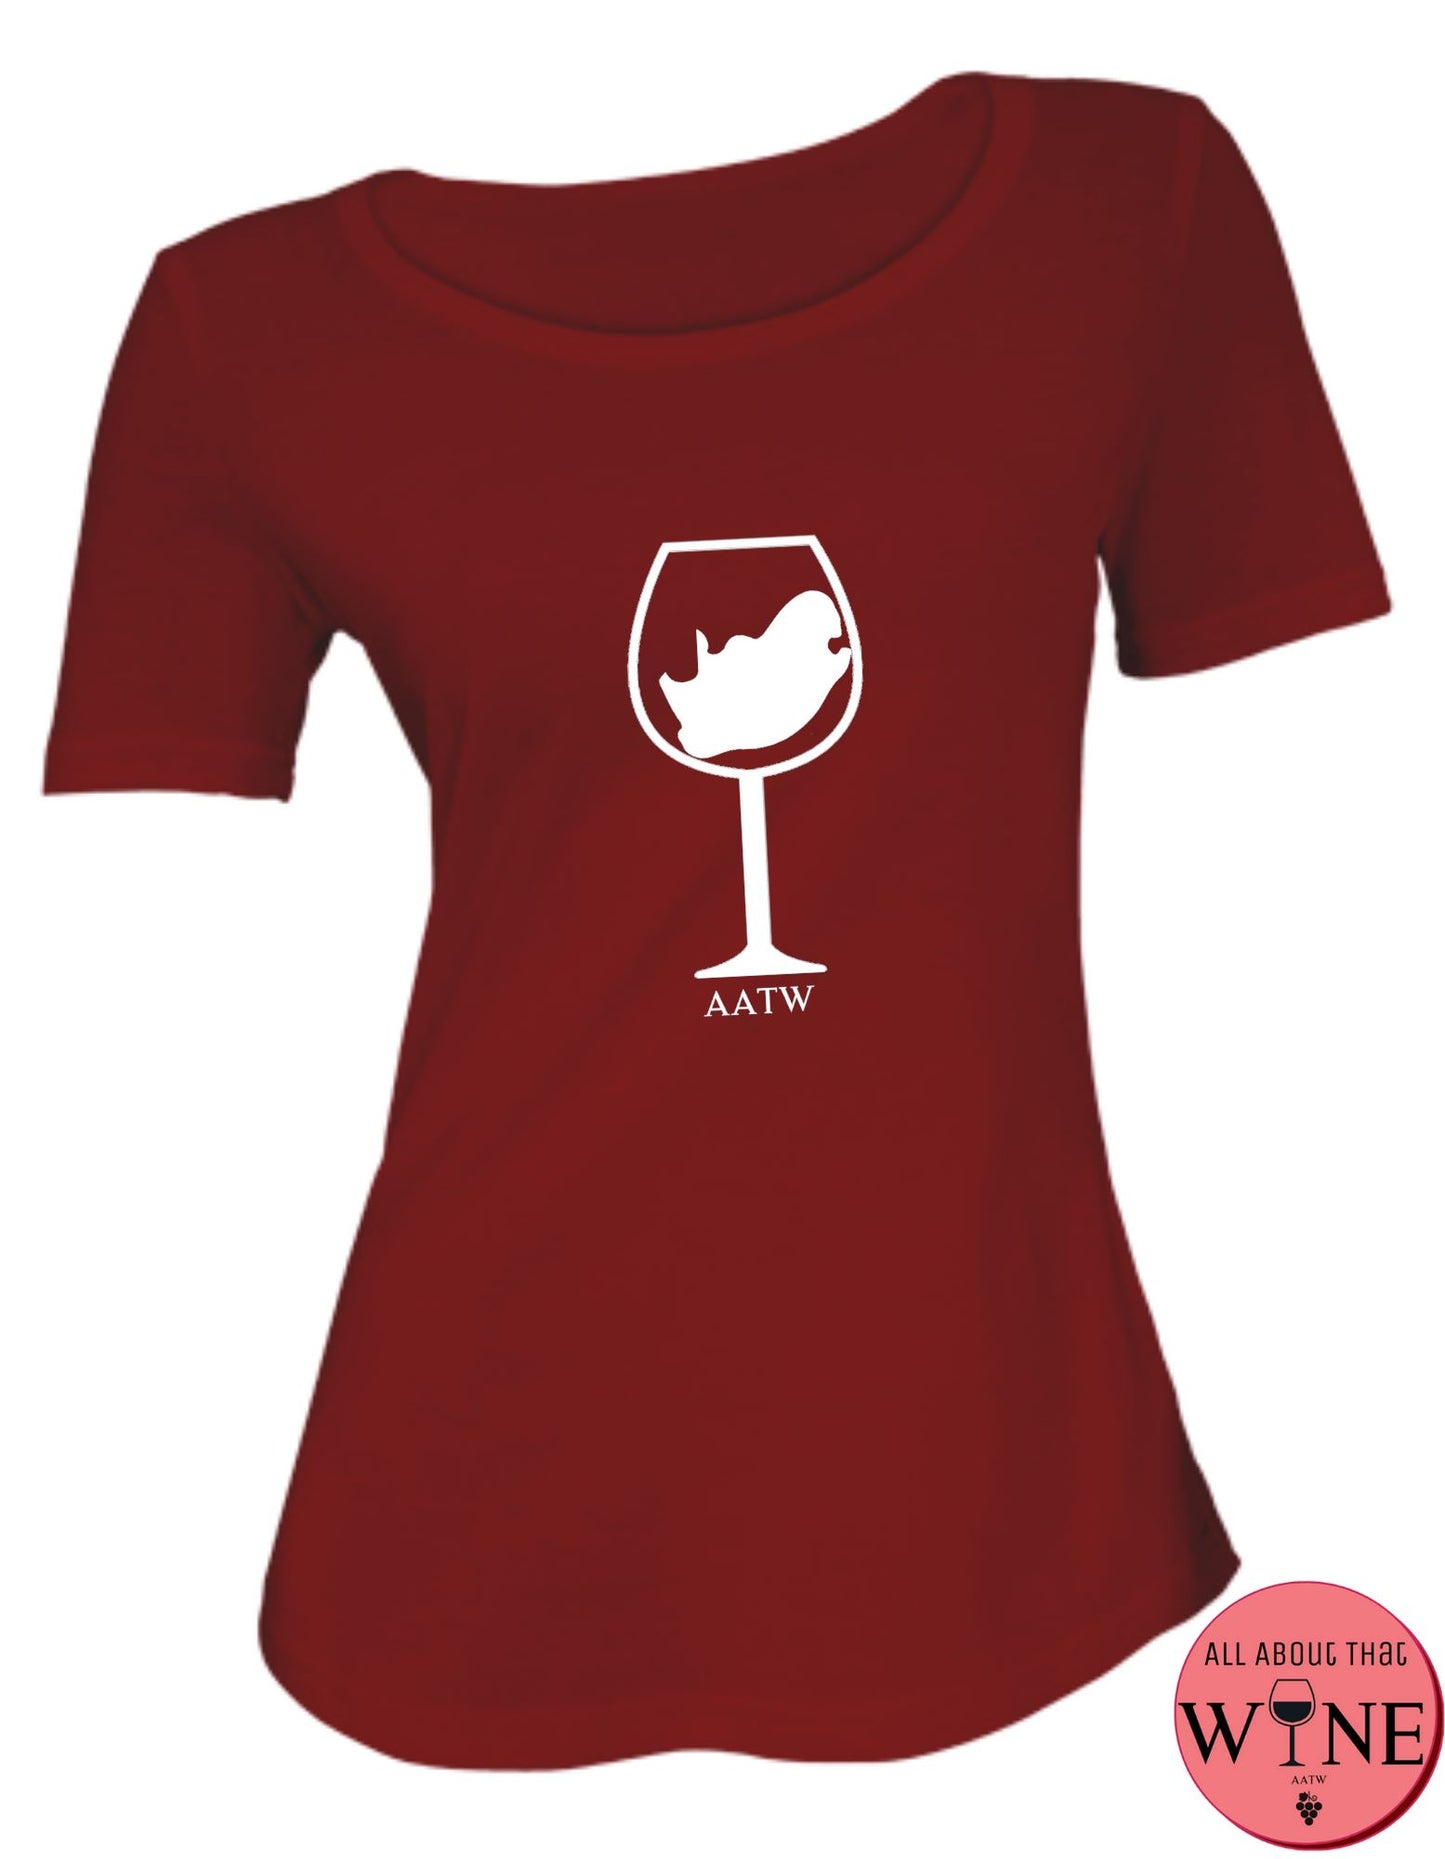 SA Wine Glass S Deep red with white